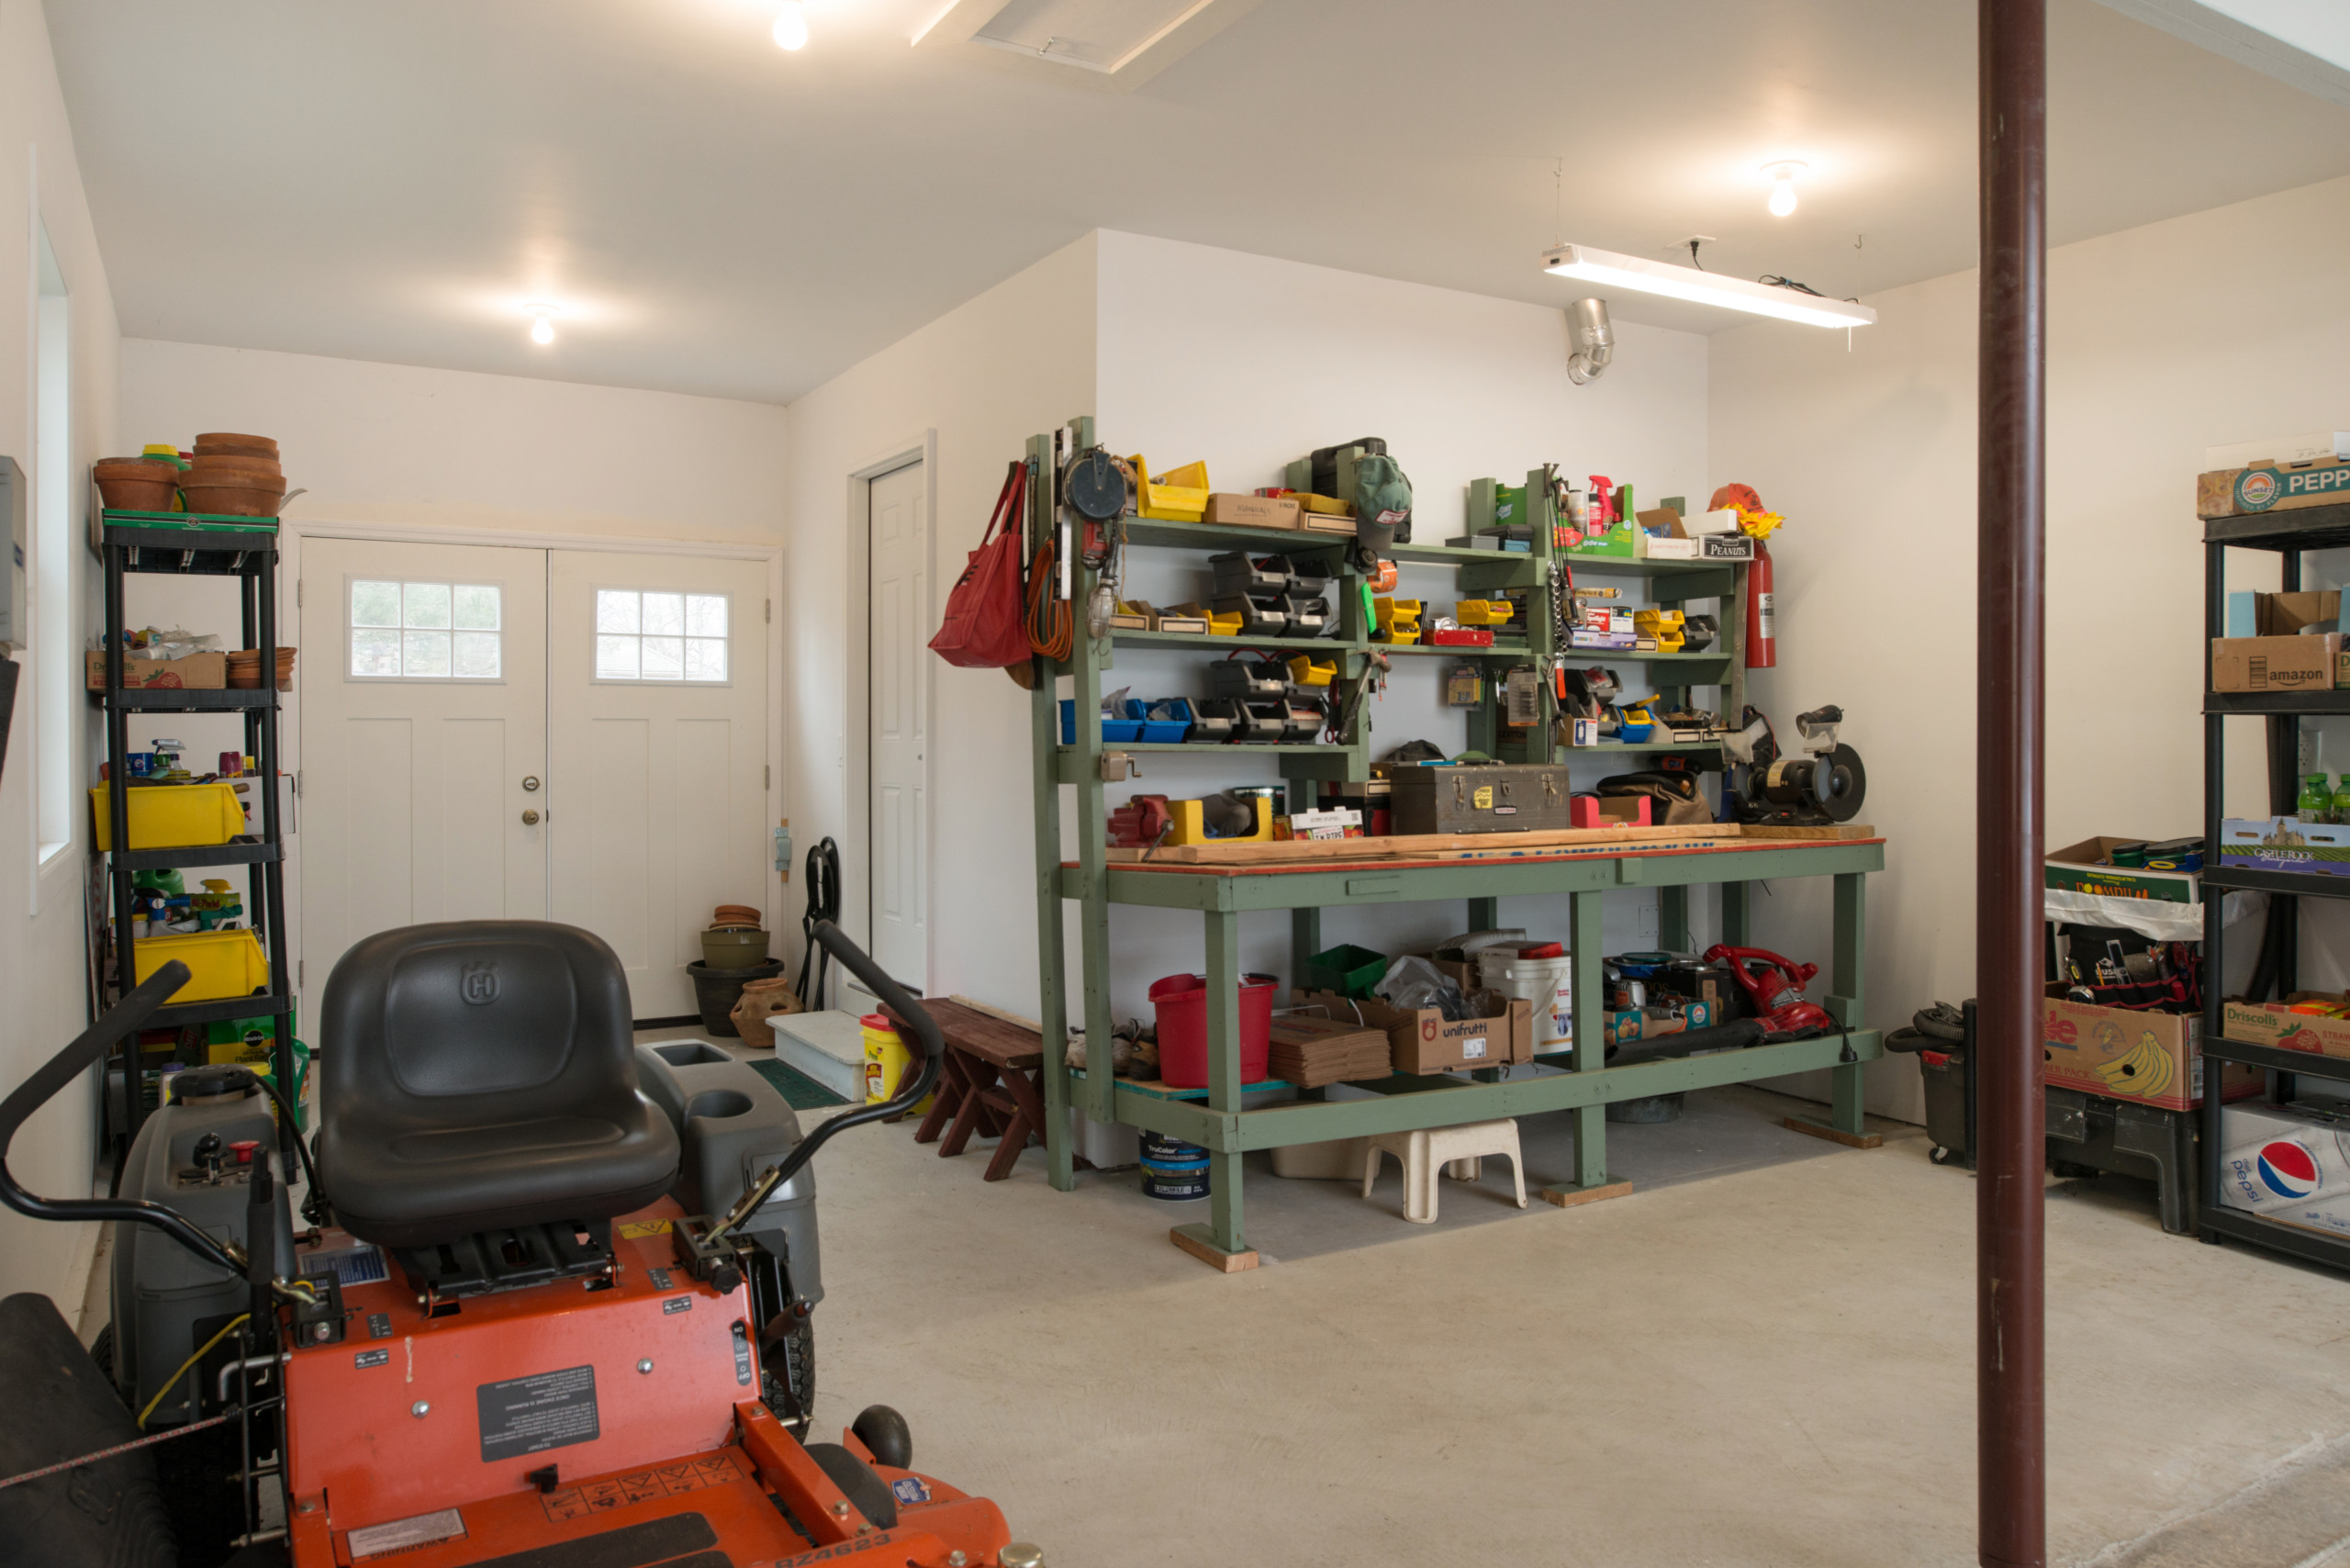 Laundry and Garage Addition